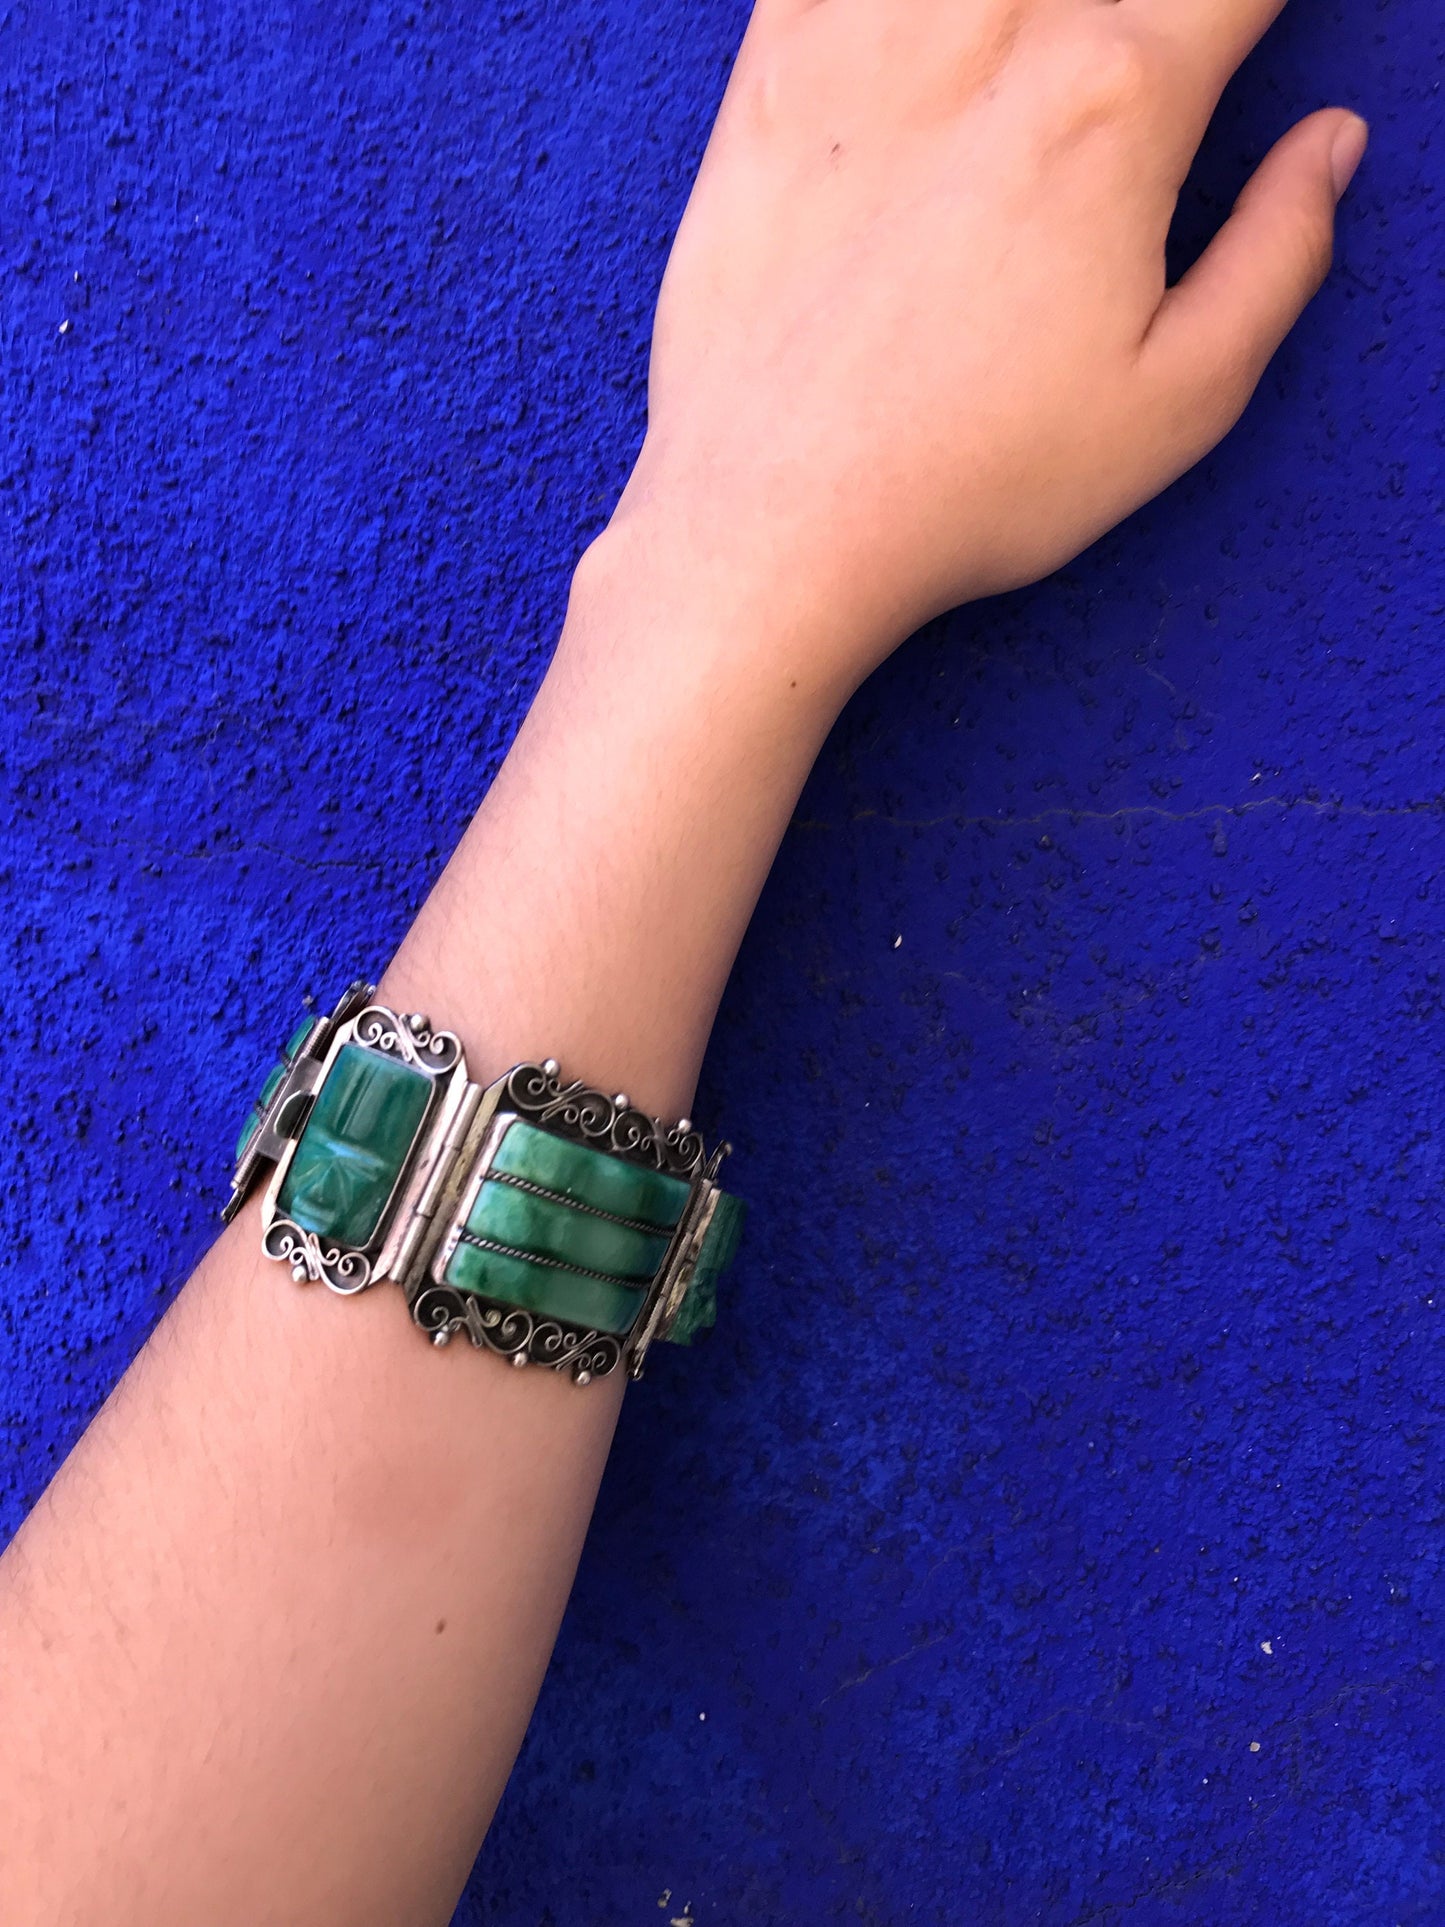 Vintage Mexican 1940s Mayan Carved Taxco Green Jade Bracelet